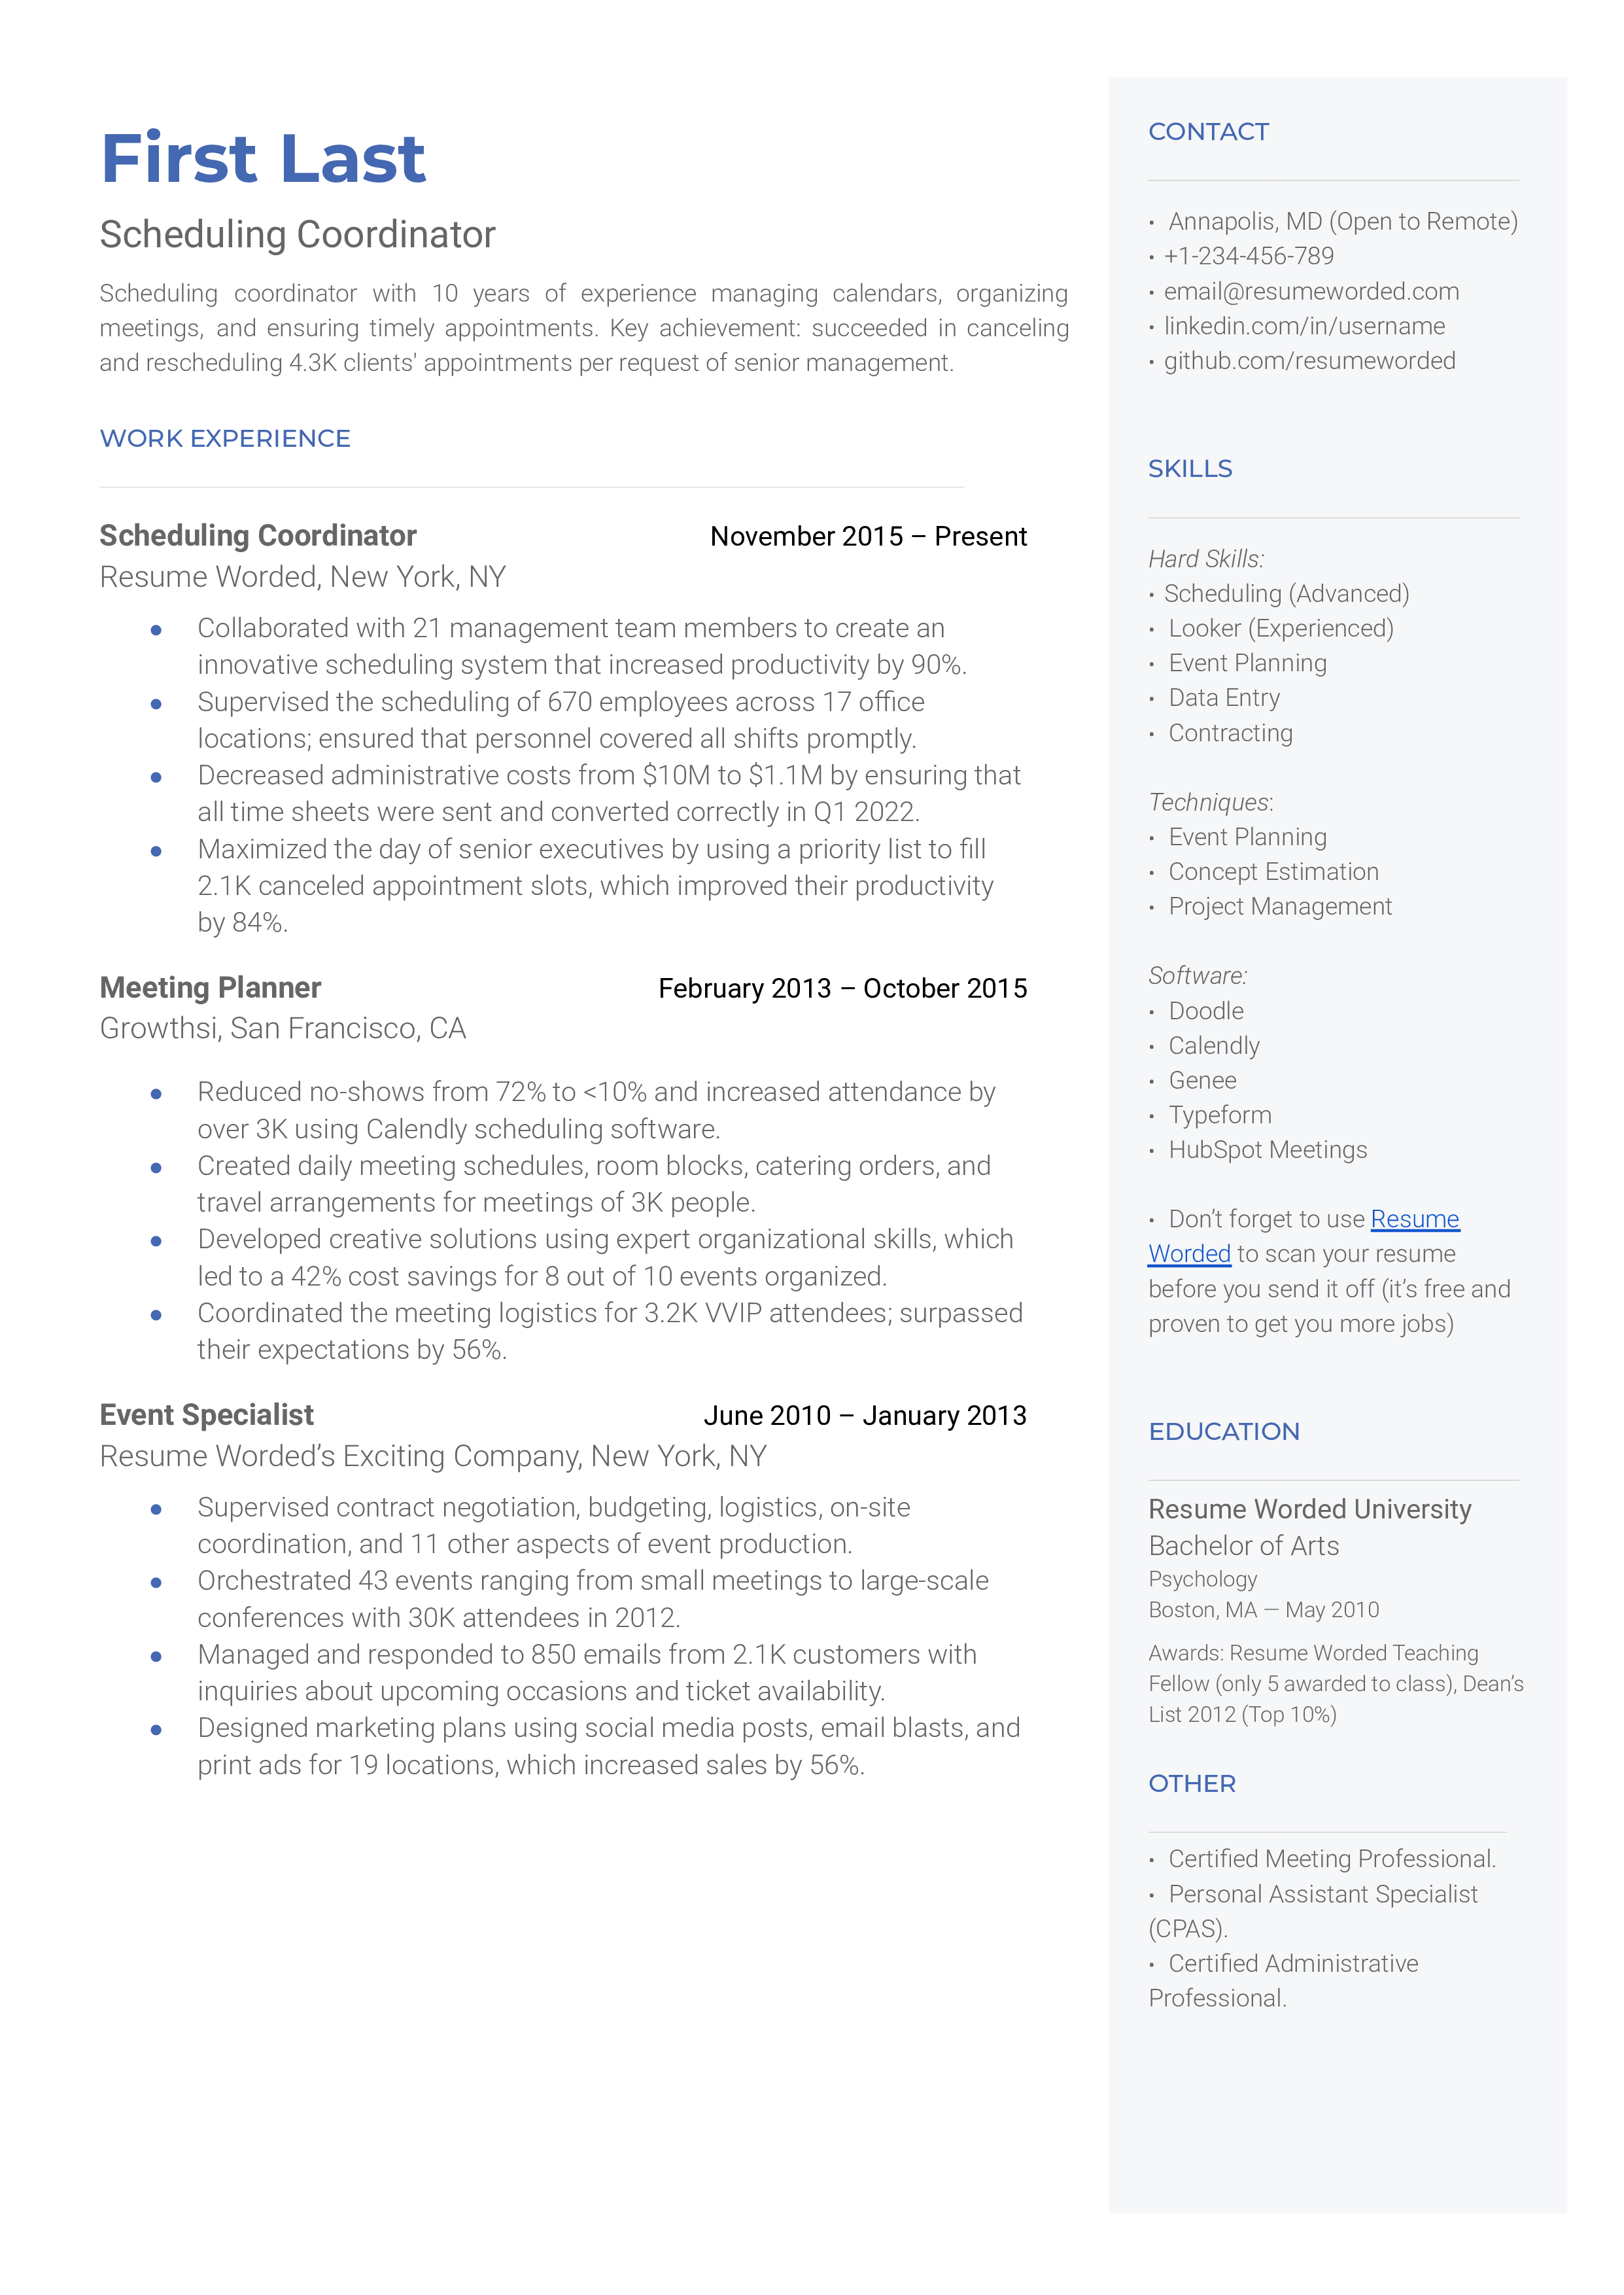 A well-structured CV showcasing the abilities of a skilled Scheduling Coordinator.